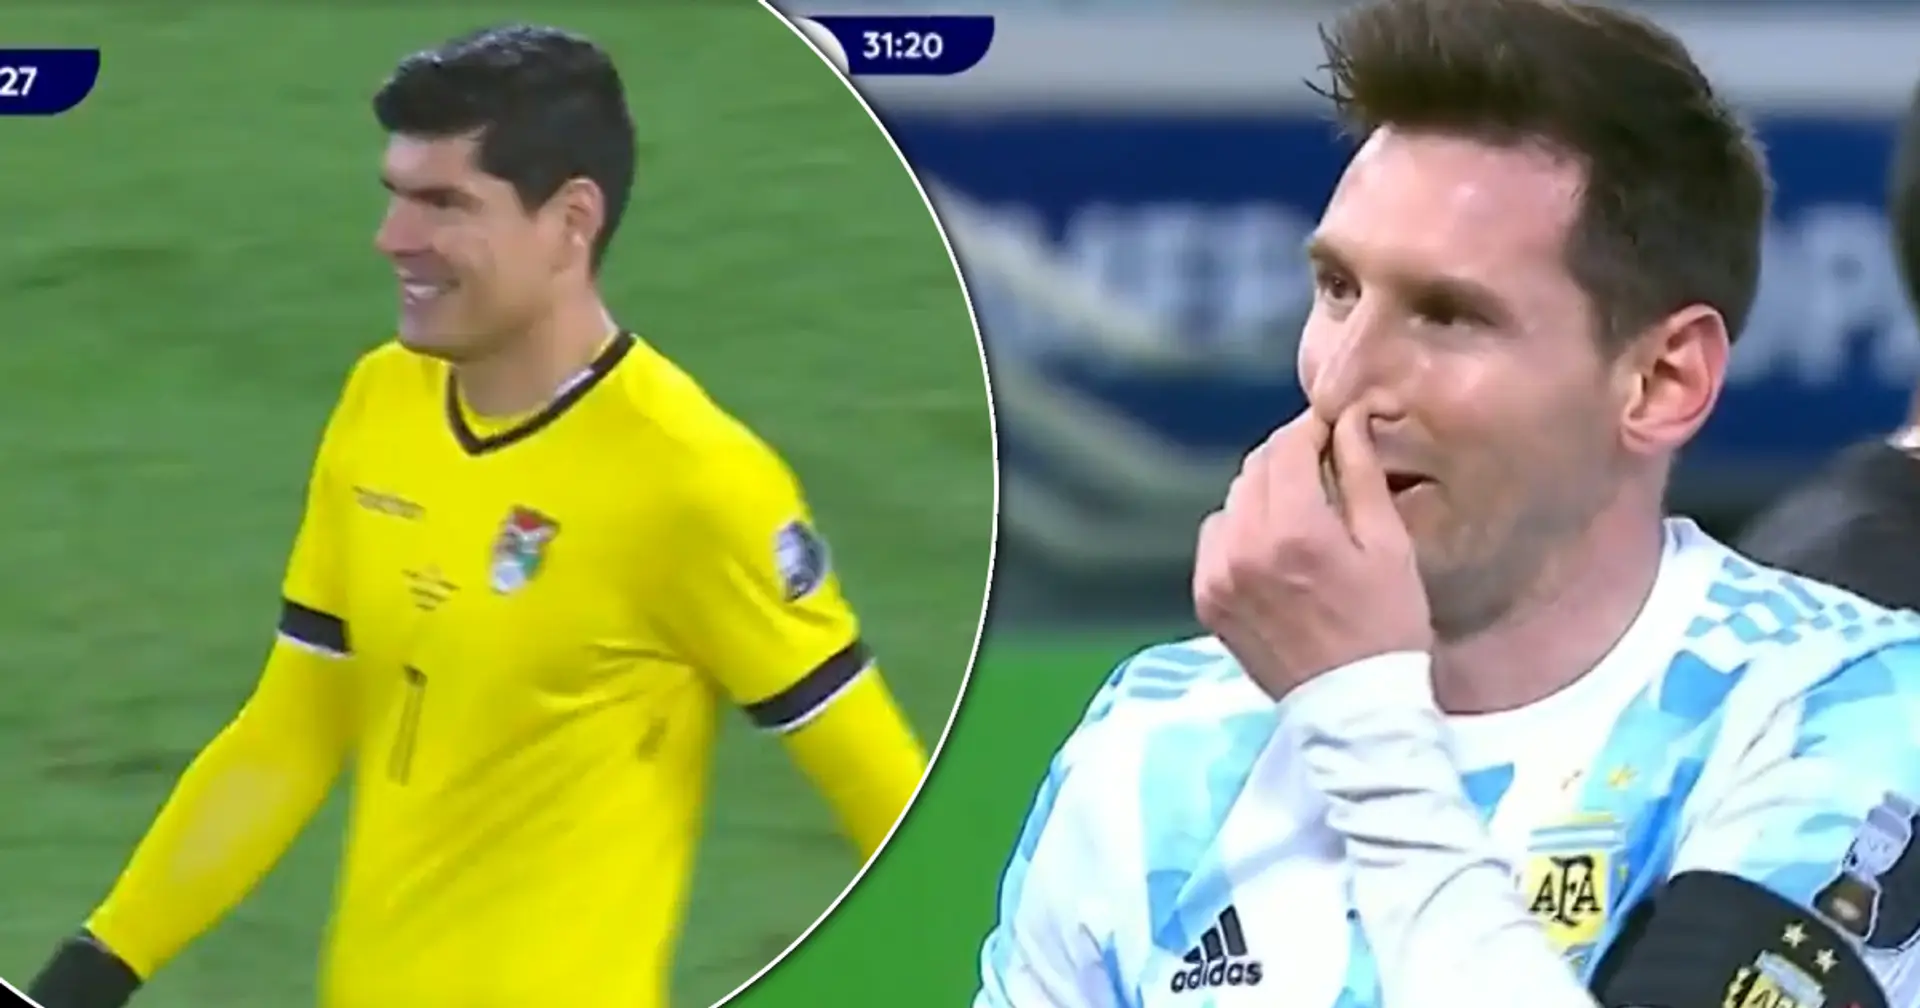 Messi and Bolivia goalkeeper share cute moment before Leo scores penalty – spotted